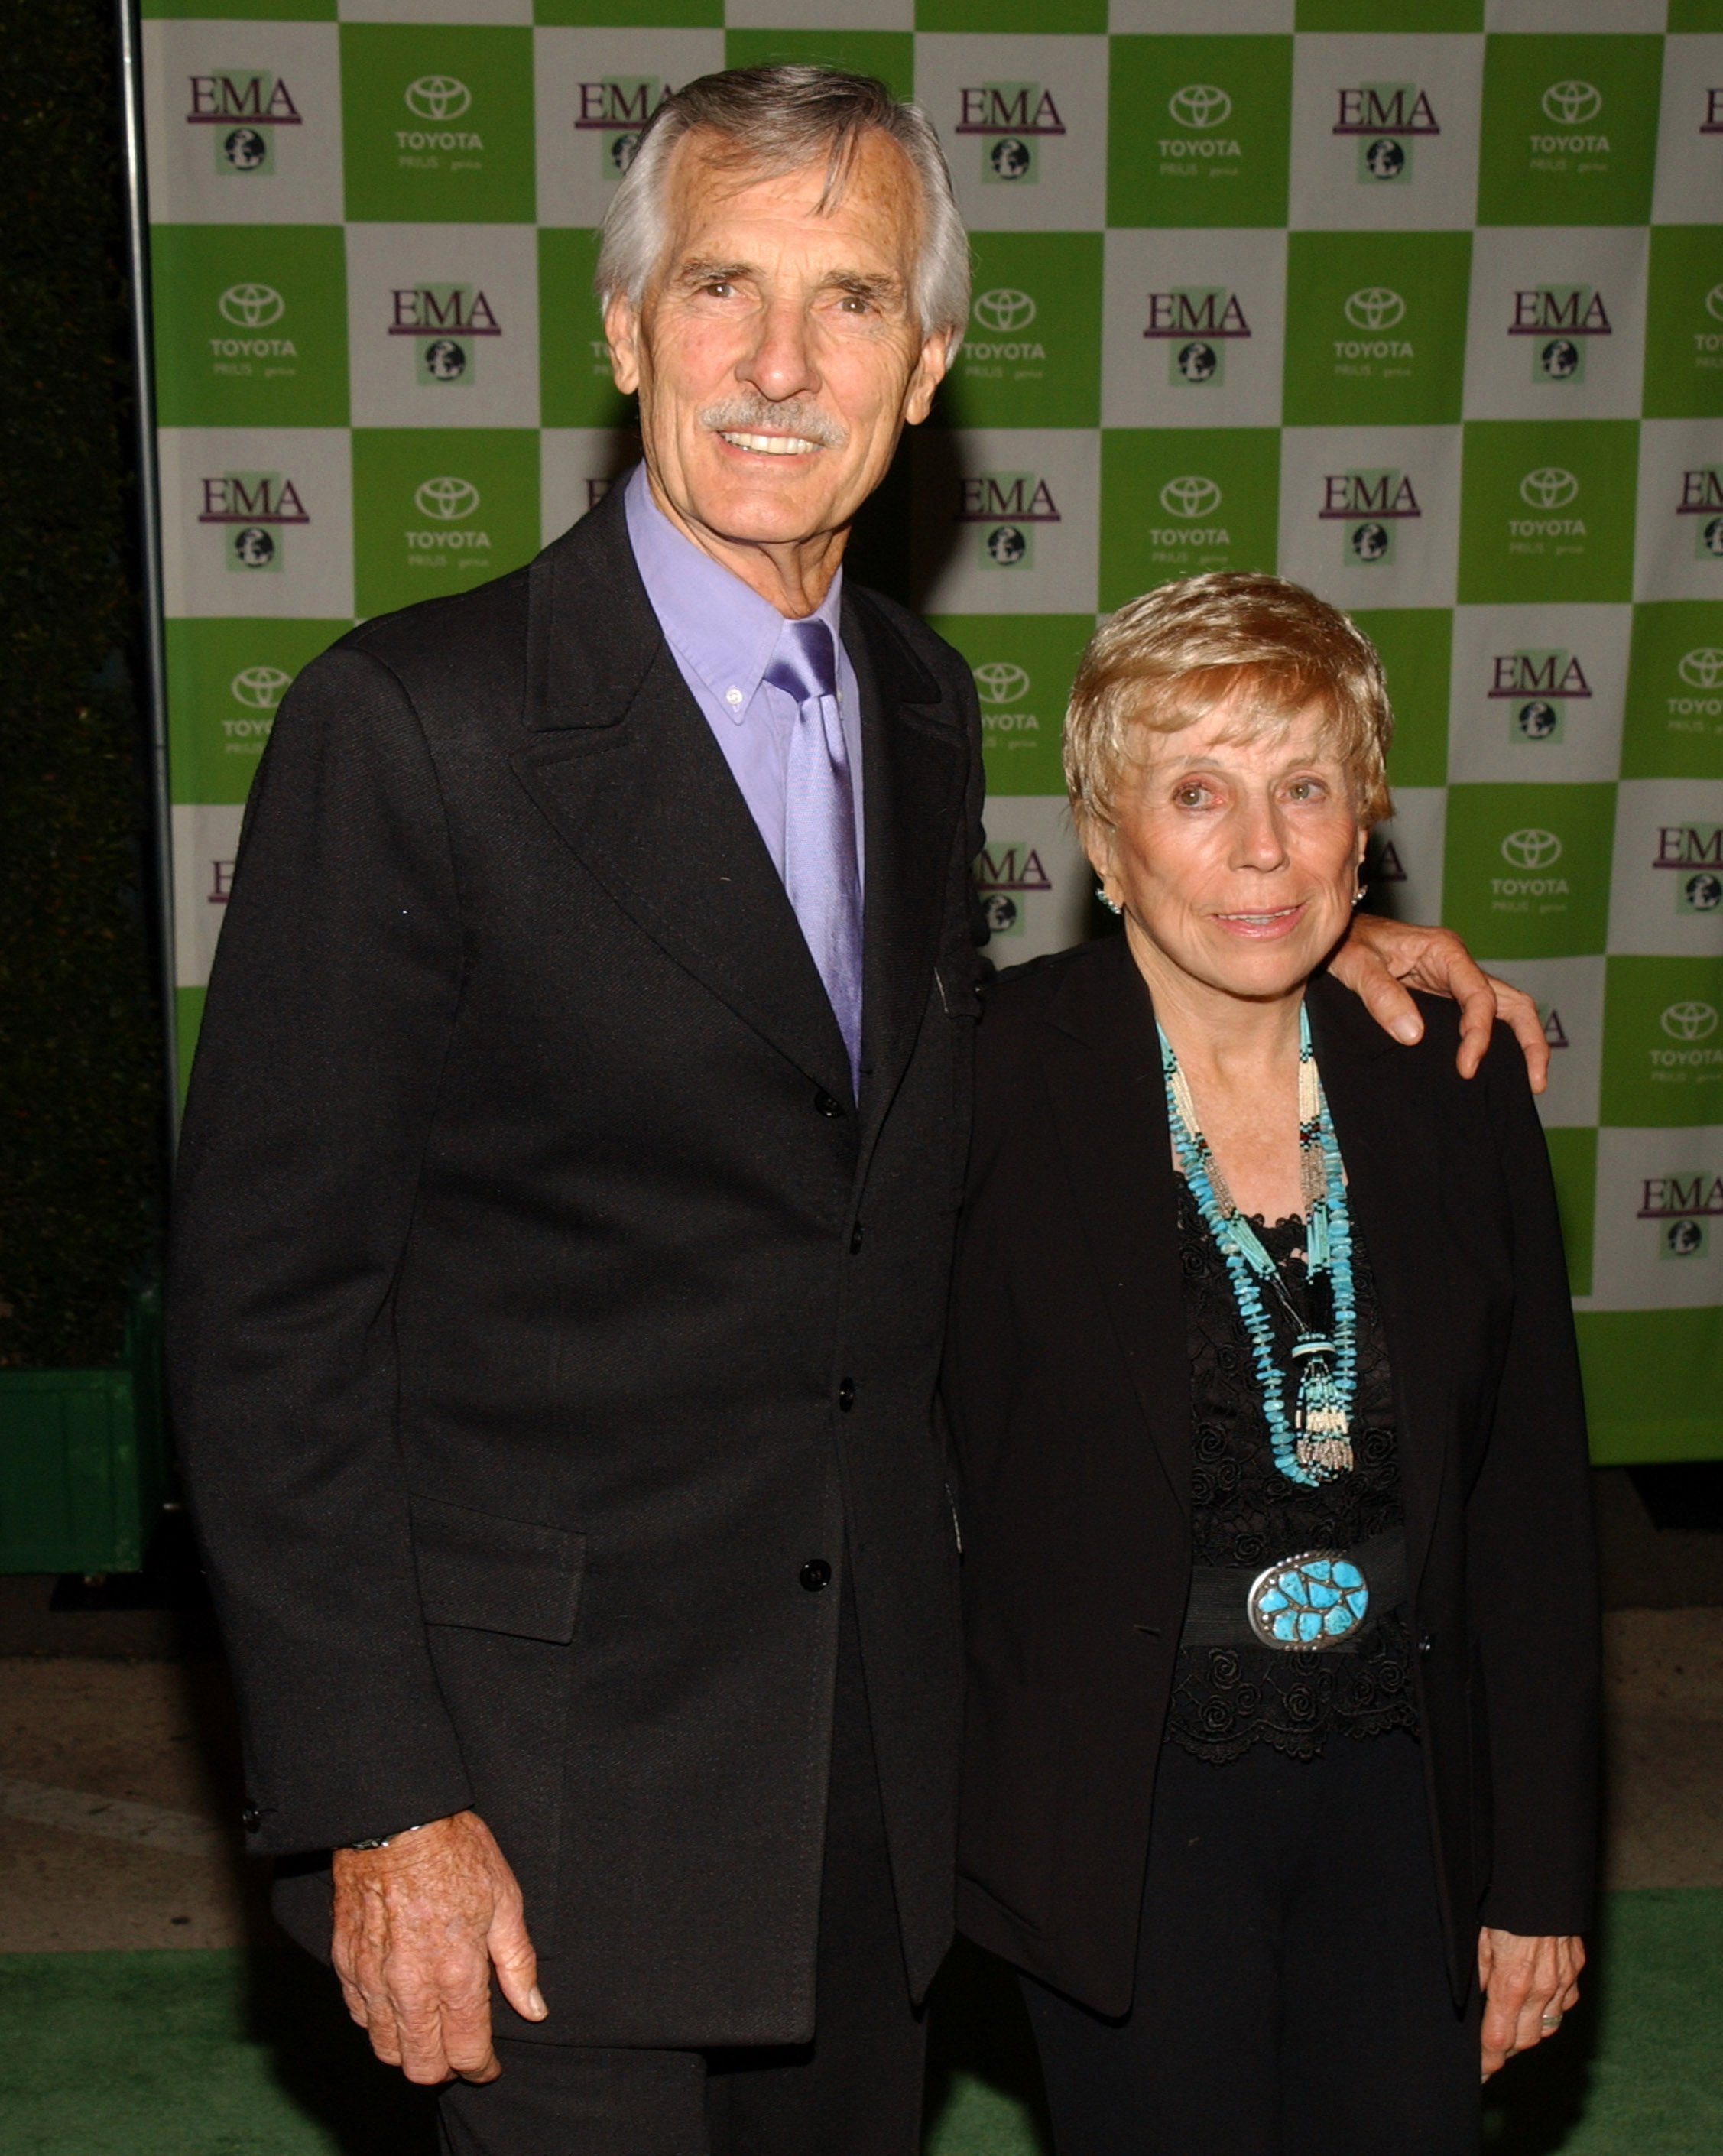 Dennis Weaver and Gerry Stowell during 13th Annual Environmental Media Awards at The Ebell Theatre in Los Angeles, California. / Source: Getty Images